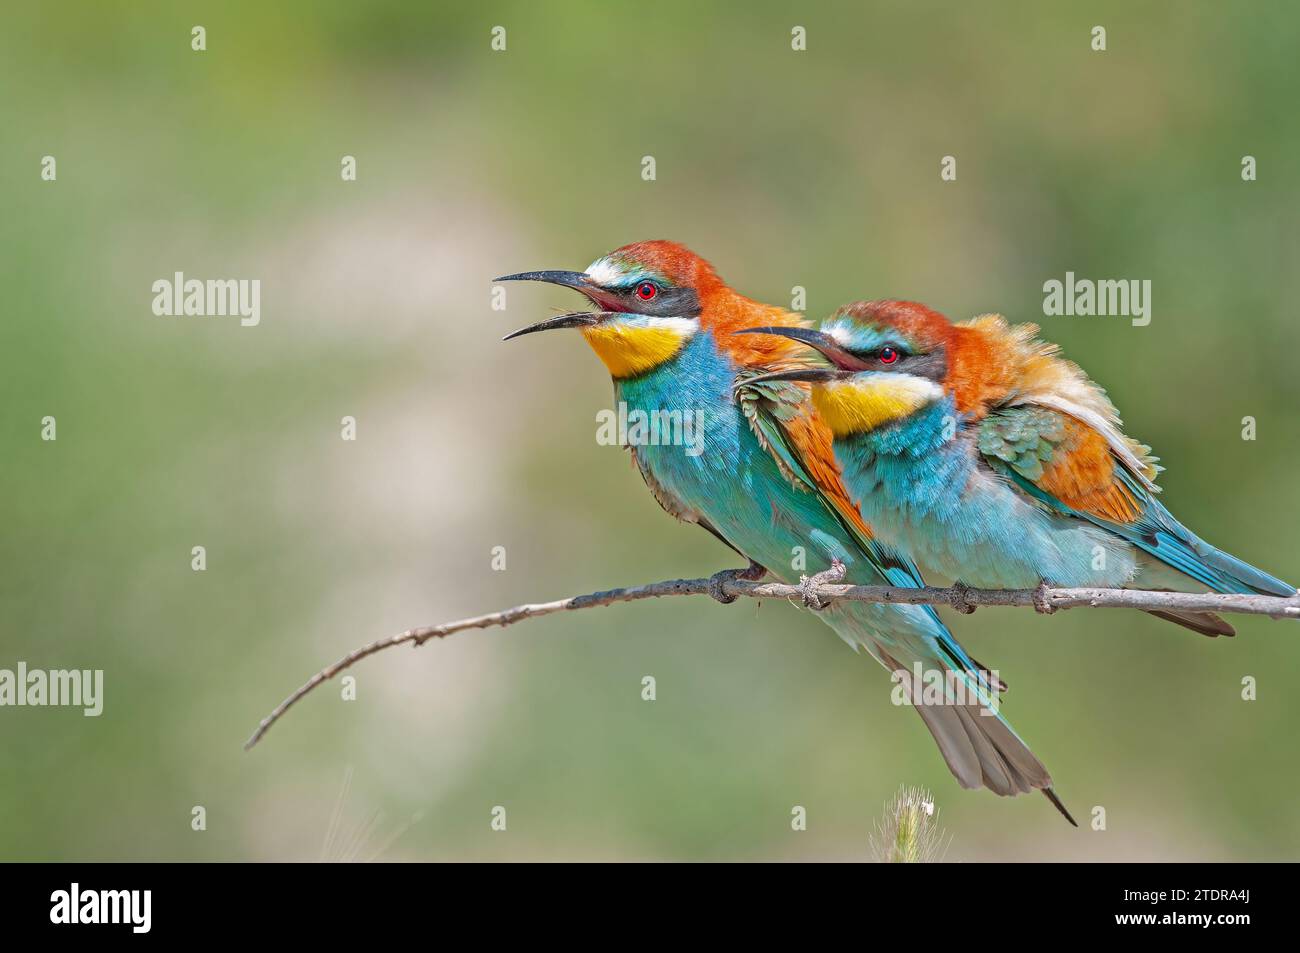 European Bee-eaters, Merops apiaster on the branch. Green background. Colourful birds. Stock Photo